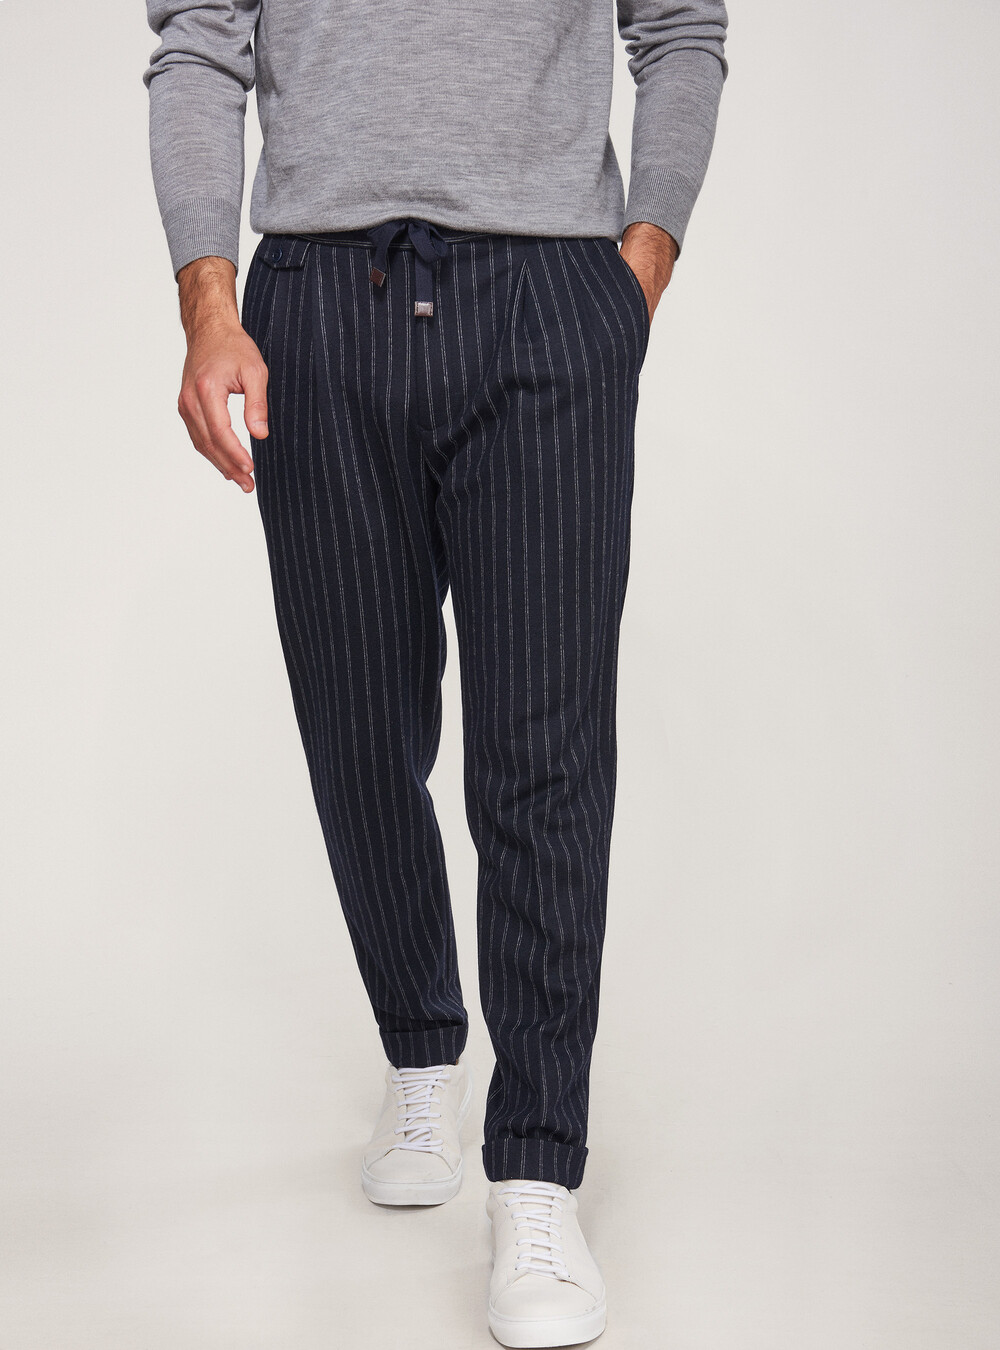 Pantaloni a righe con coulisse